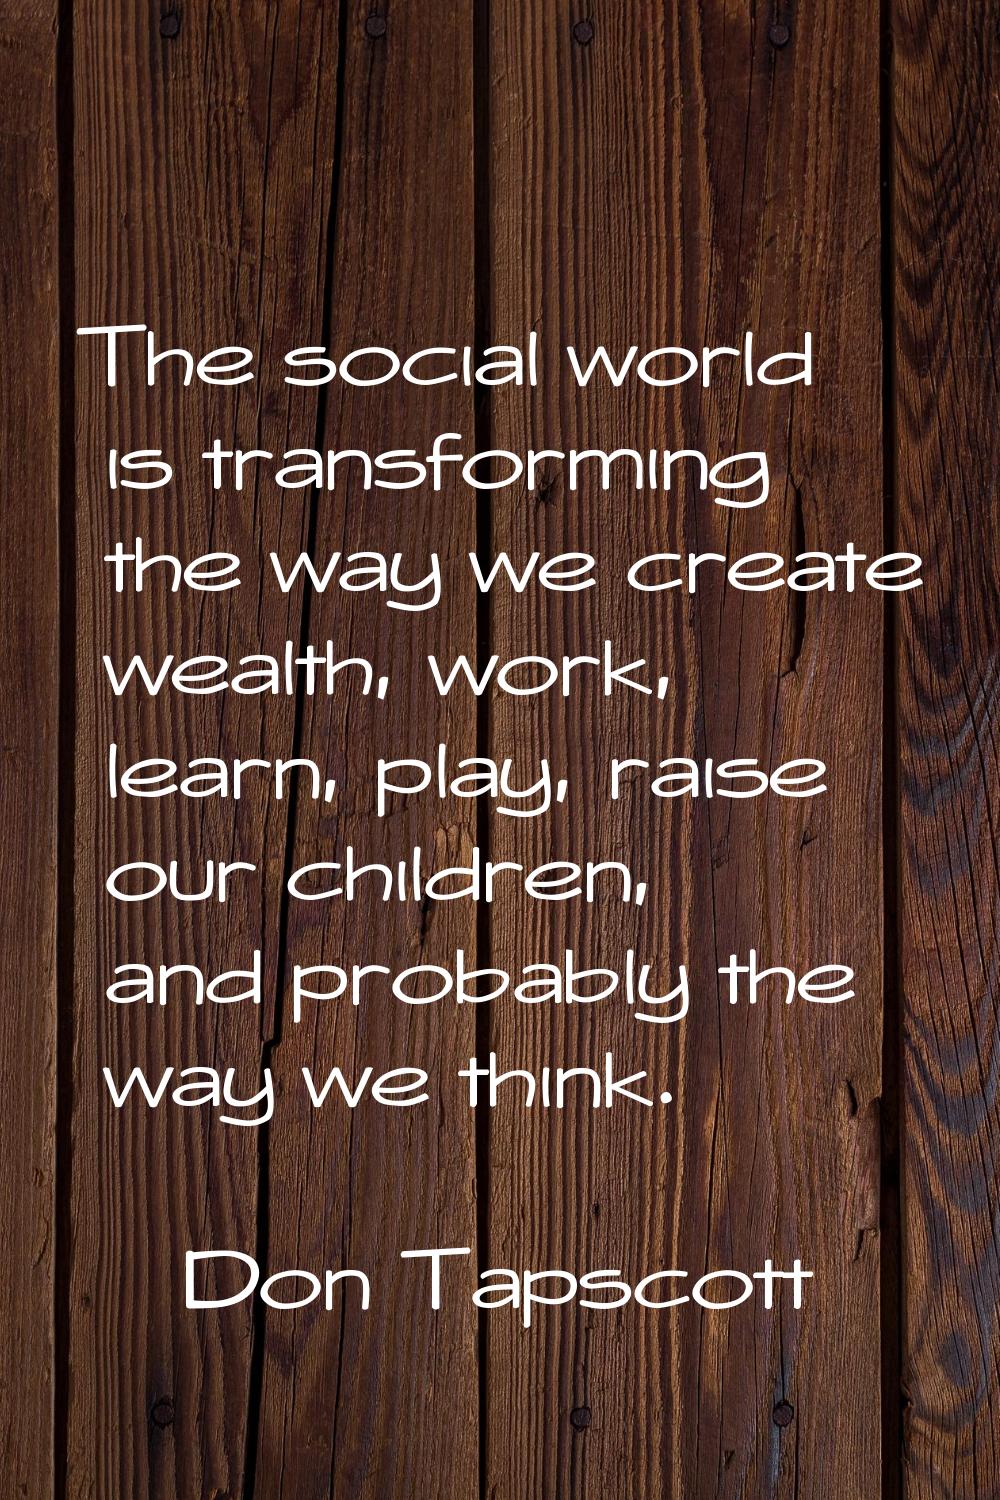 The social world is transforming the way we create wealth, work, learn, play, raise our children, a